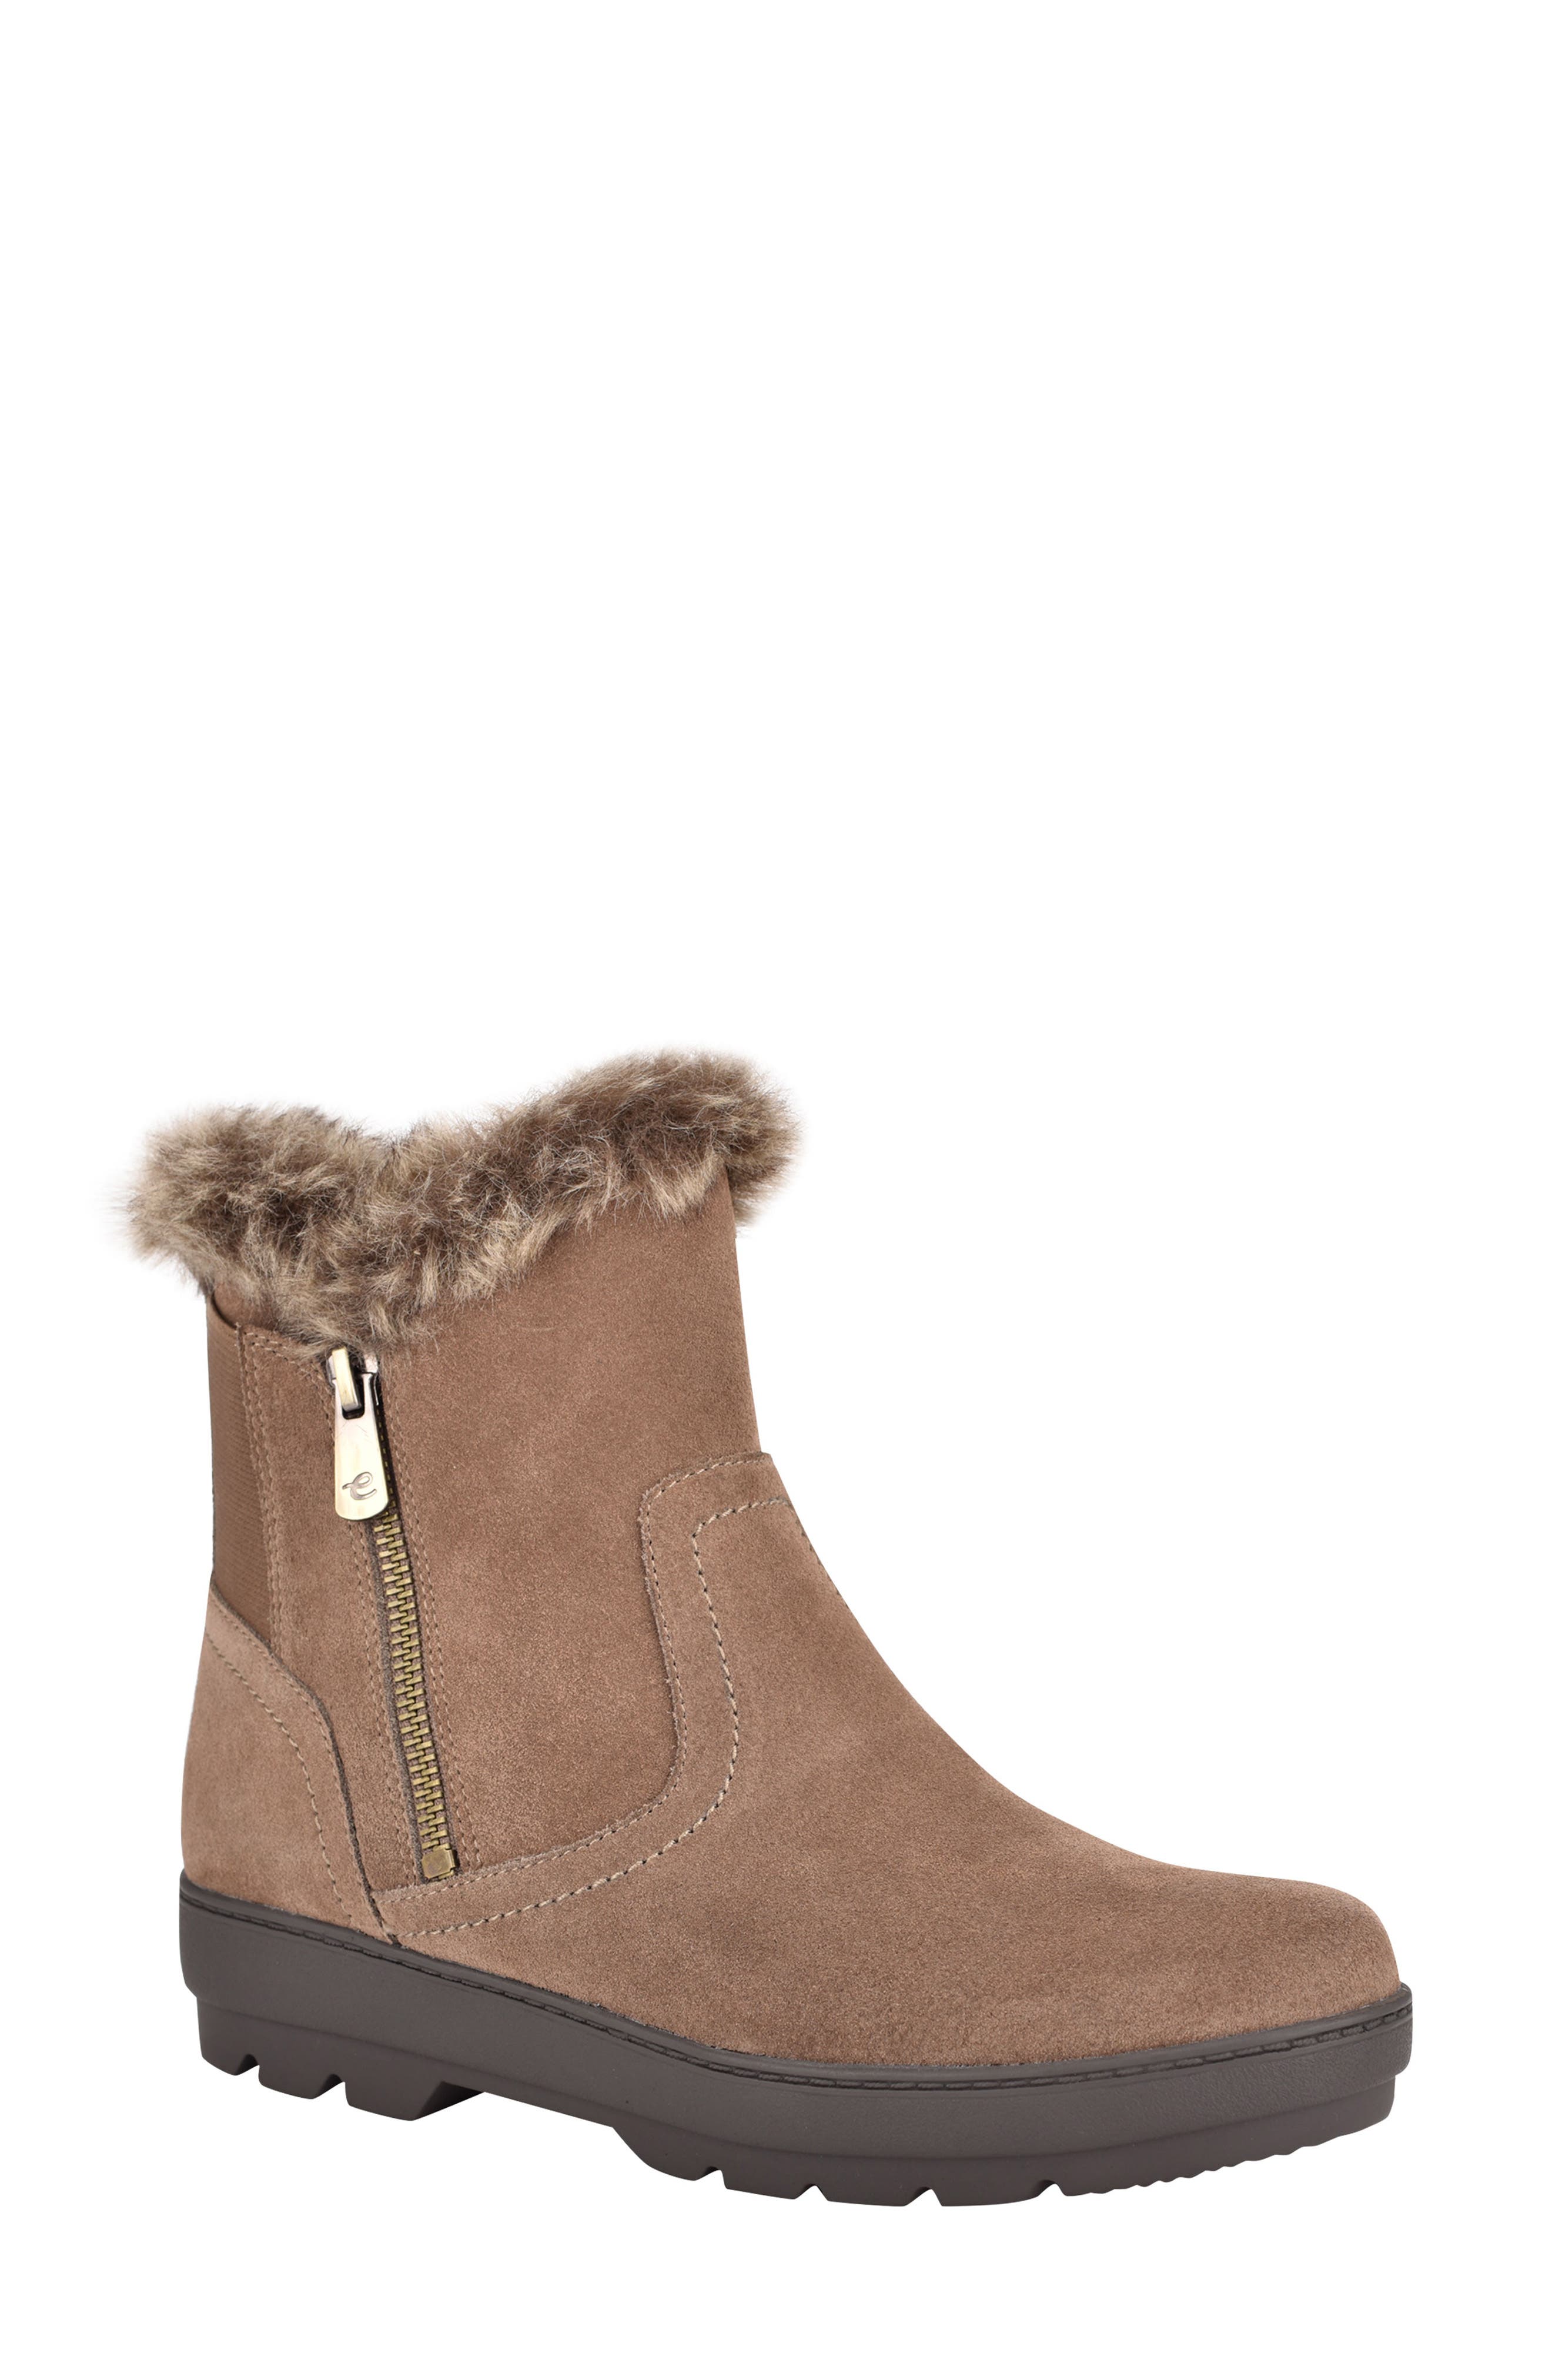 adabelle casual bootie